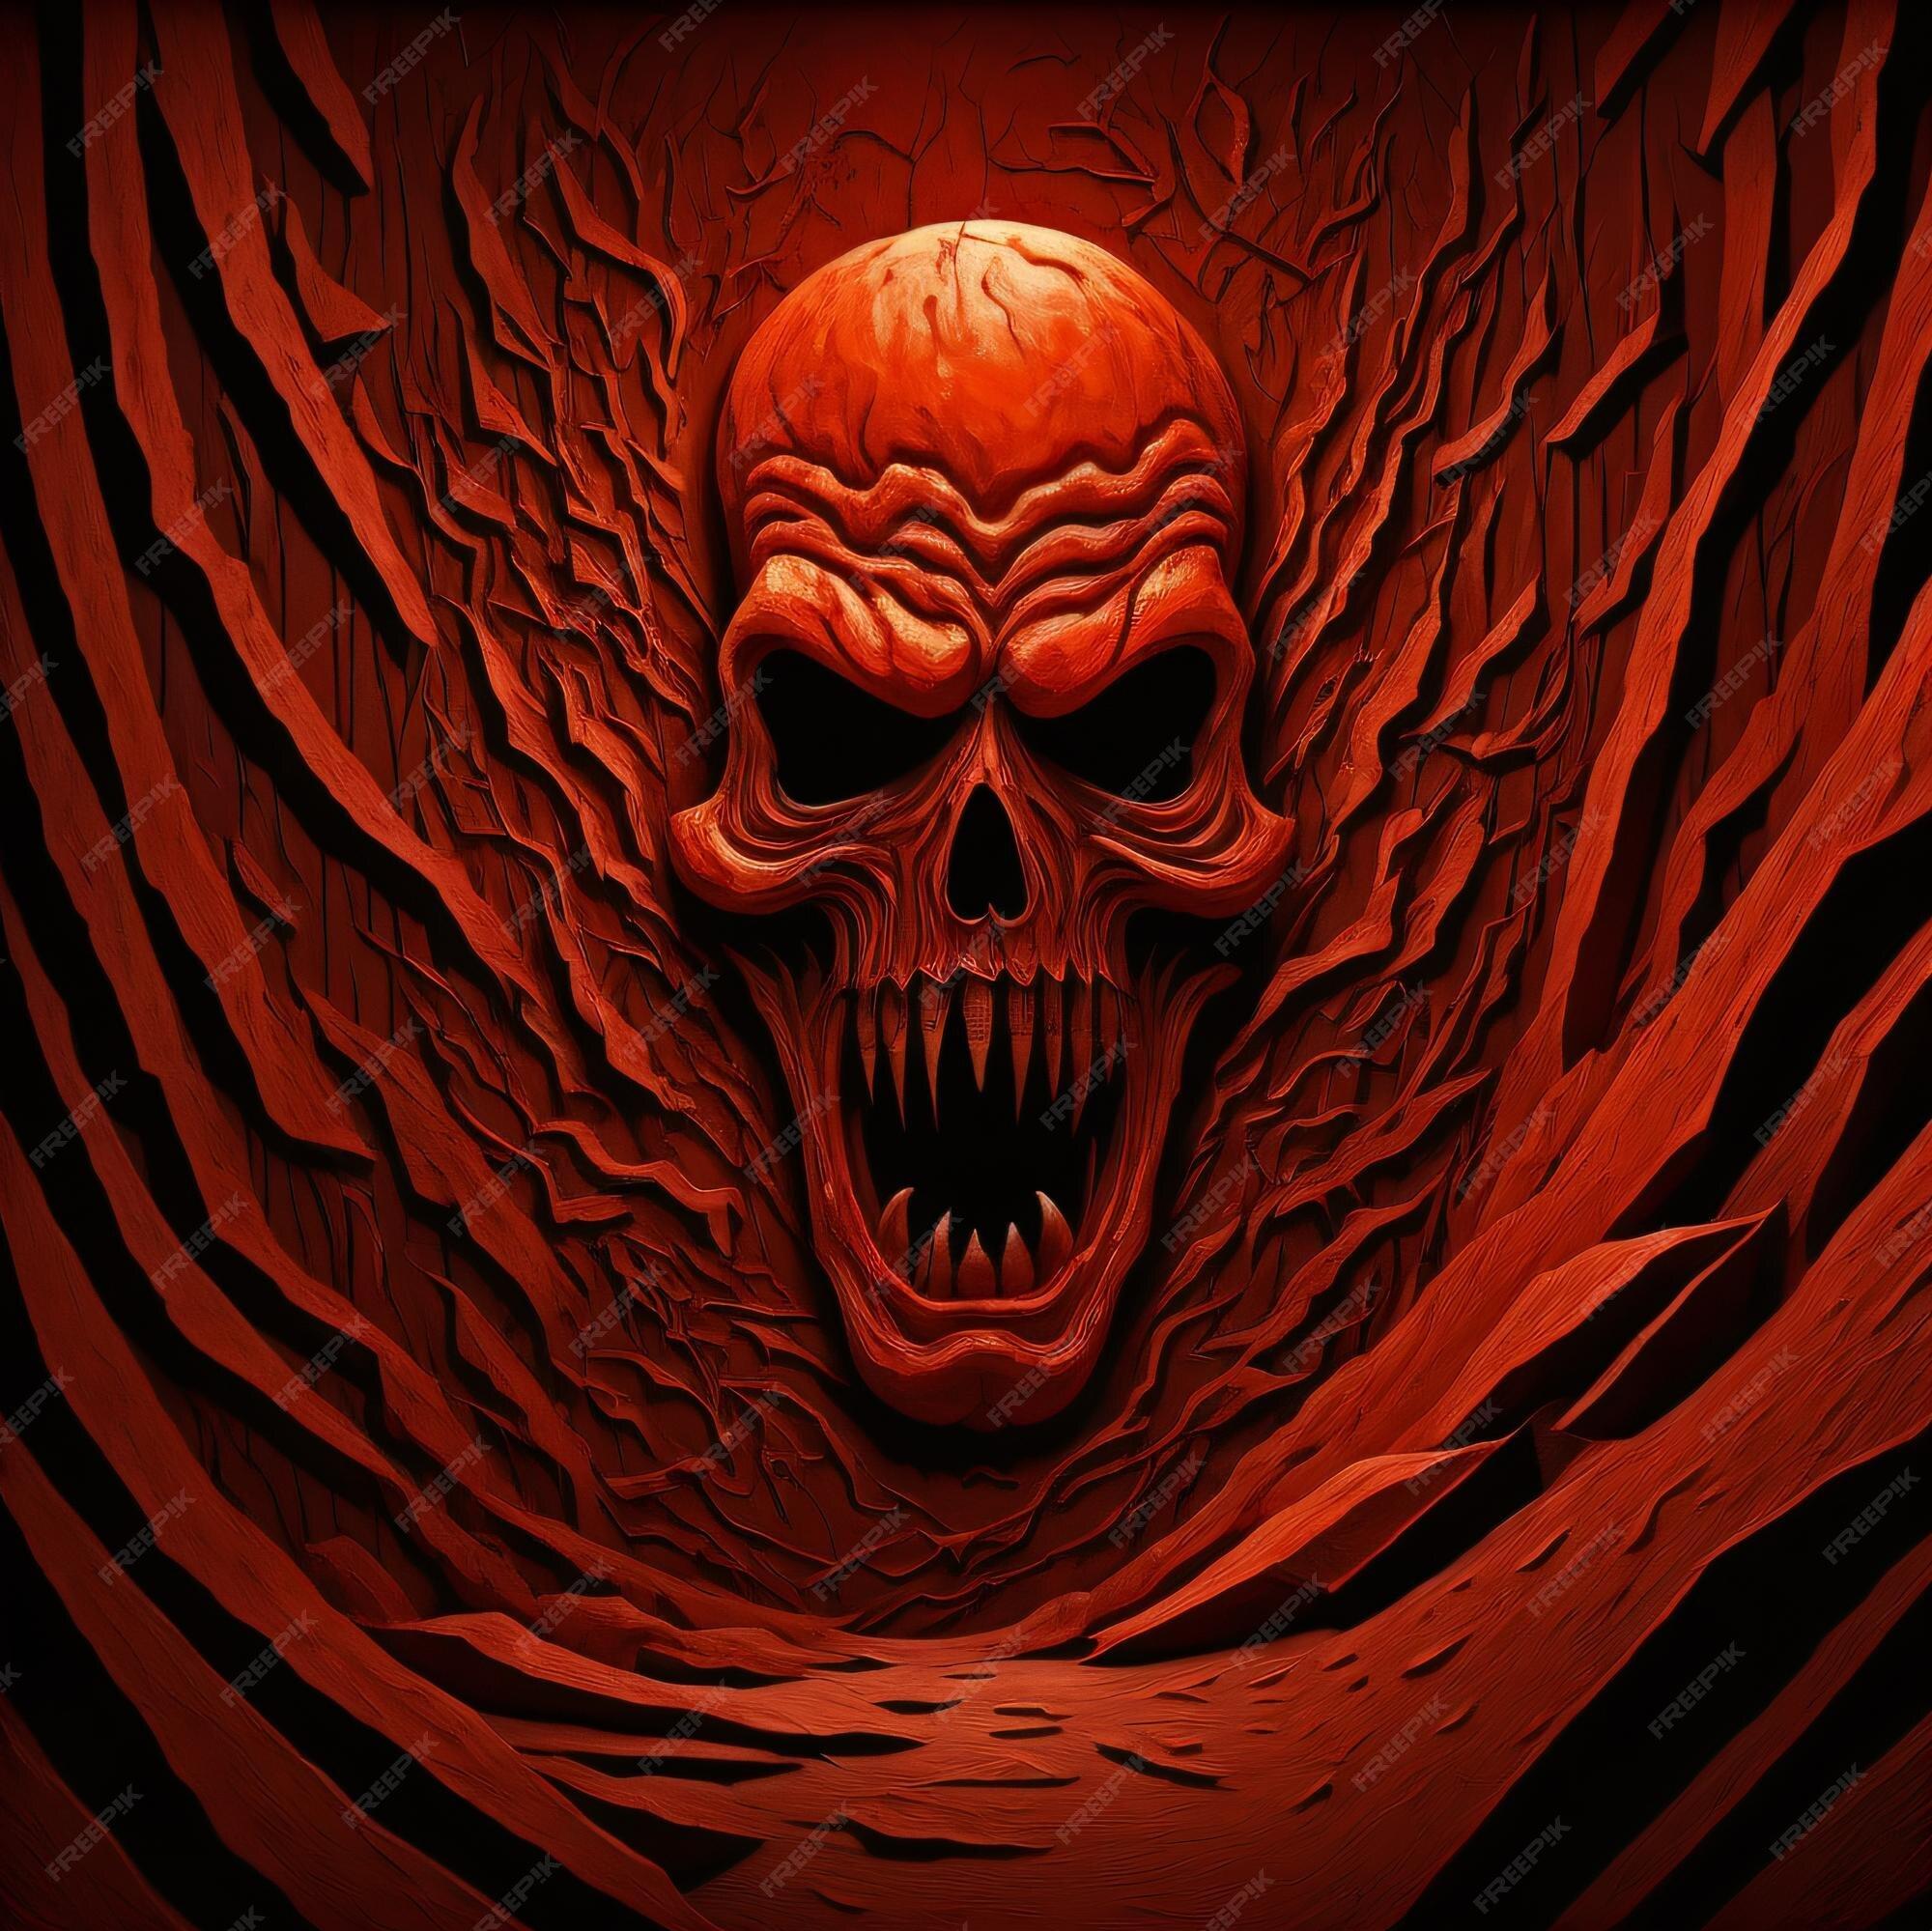 Premium Photo A Poster With Monster Head And Red Background